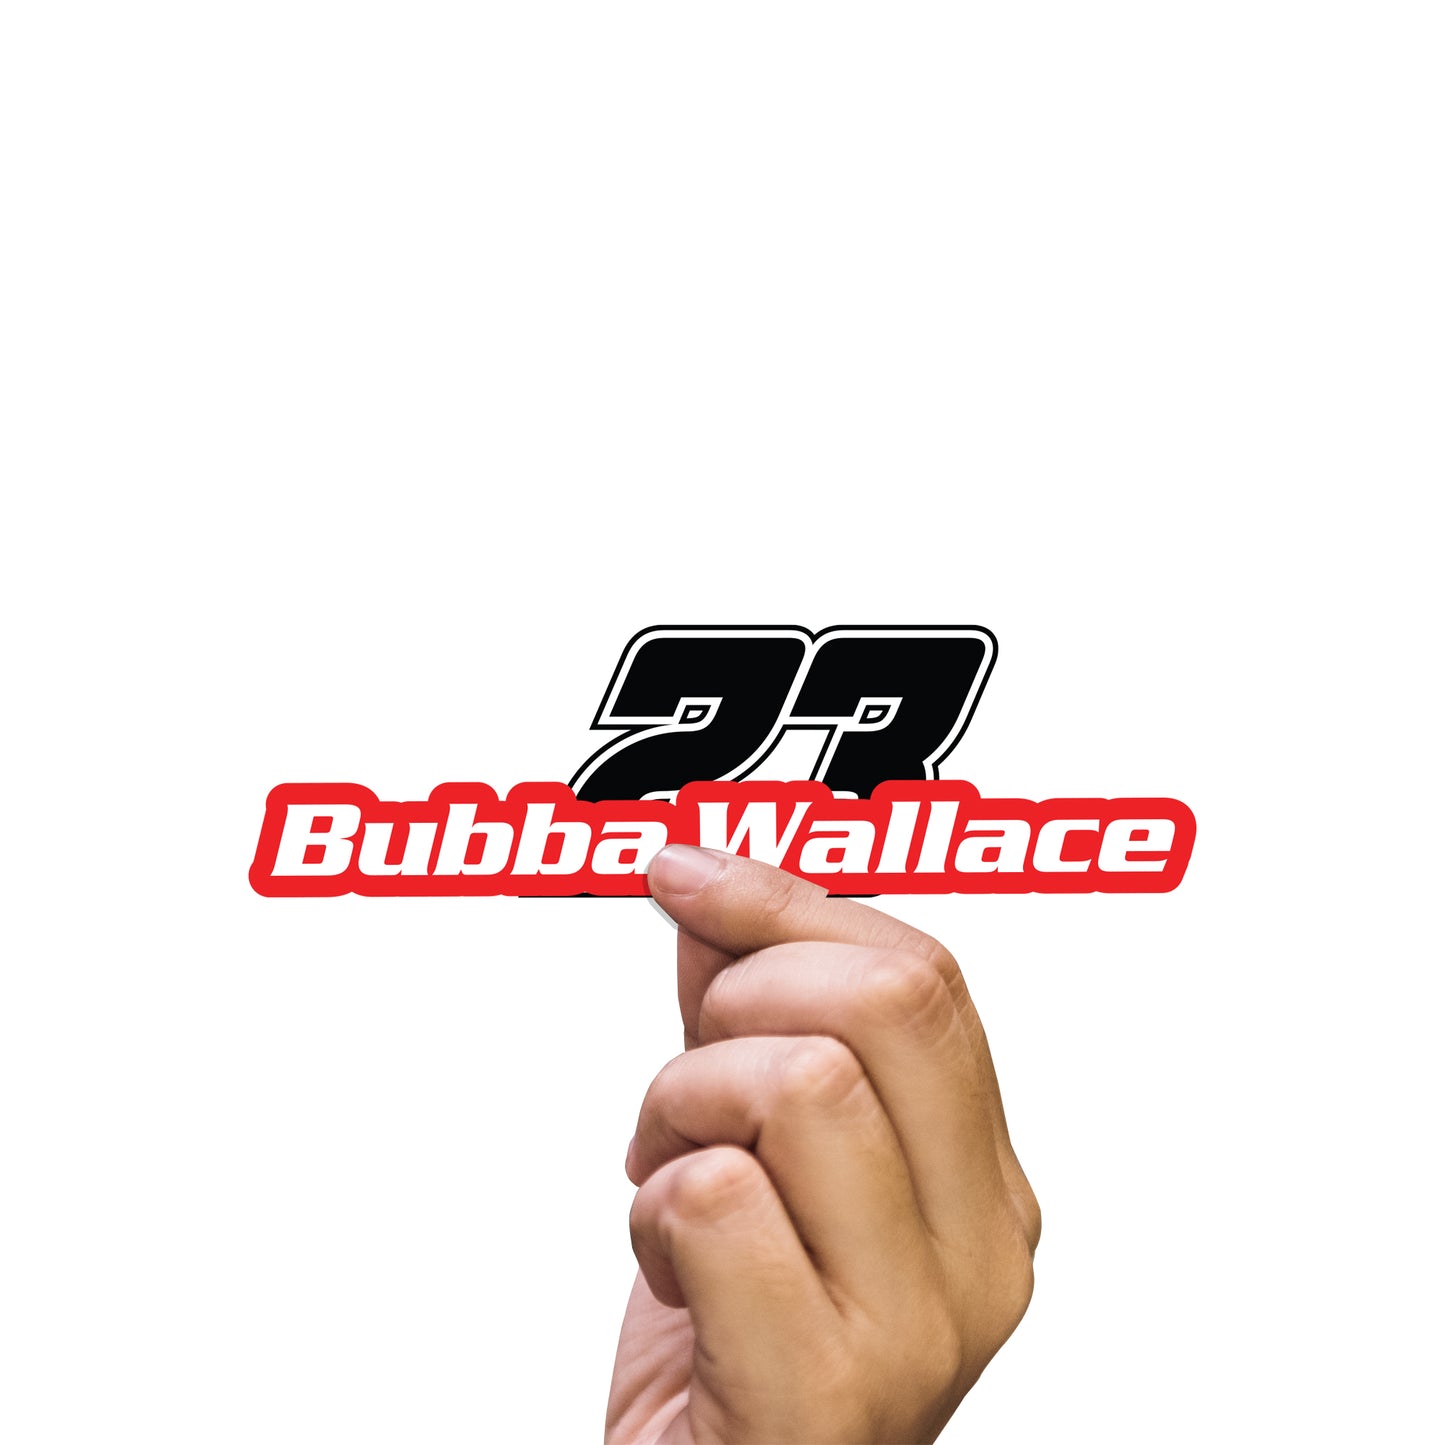 Sheet of 5 -Bubba Wallace 2021 #23 Logo MINIS        - Officially Licensed NASCAR Removable    Adhesive Decal